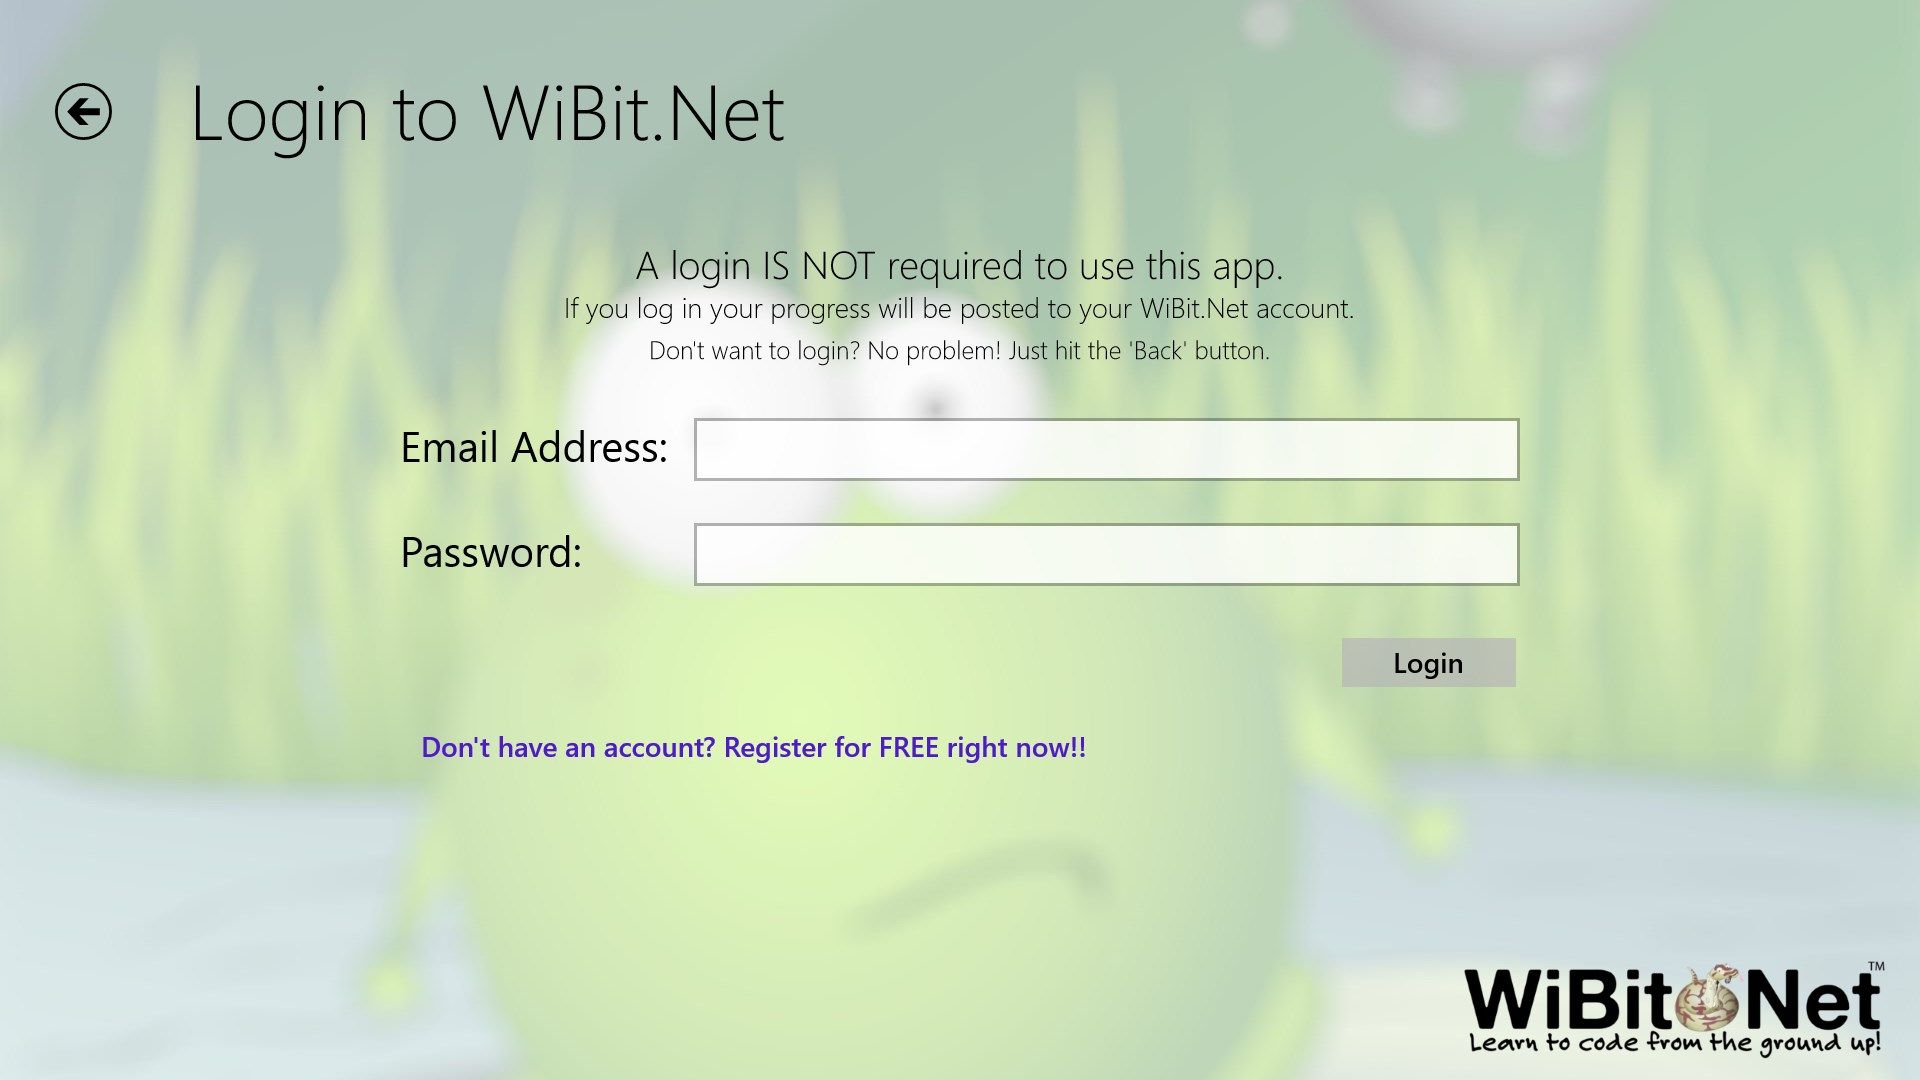 Login with your WiBit.Net account to track progress (not required)